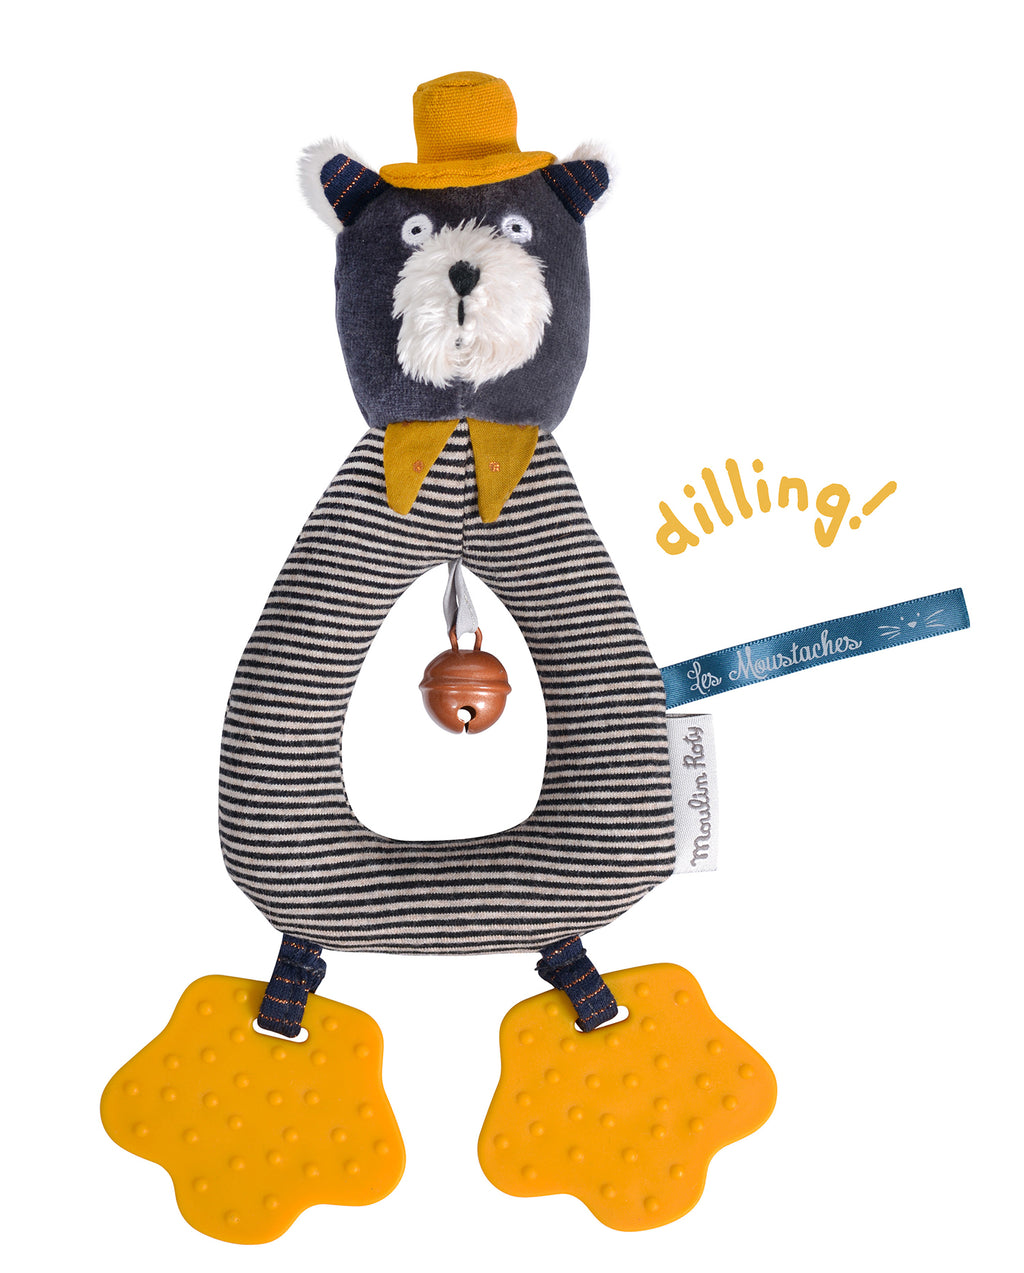 This Moulin Roty's Alphonse The Cat rattle doubles up as a teether ; its ring shape makes it easy for little hands to grab and it has a bell to entertain your child. Its delicate yellow and gray colours and contrasts make it a favourite for newborns and their parents.